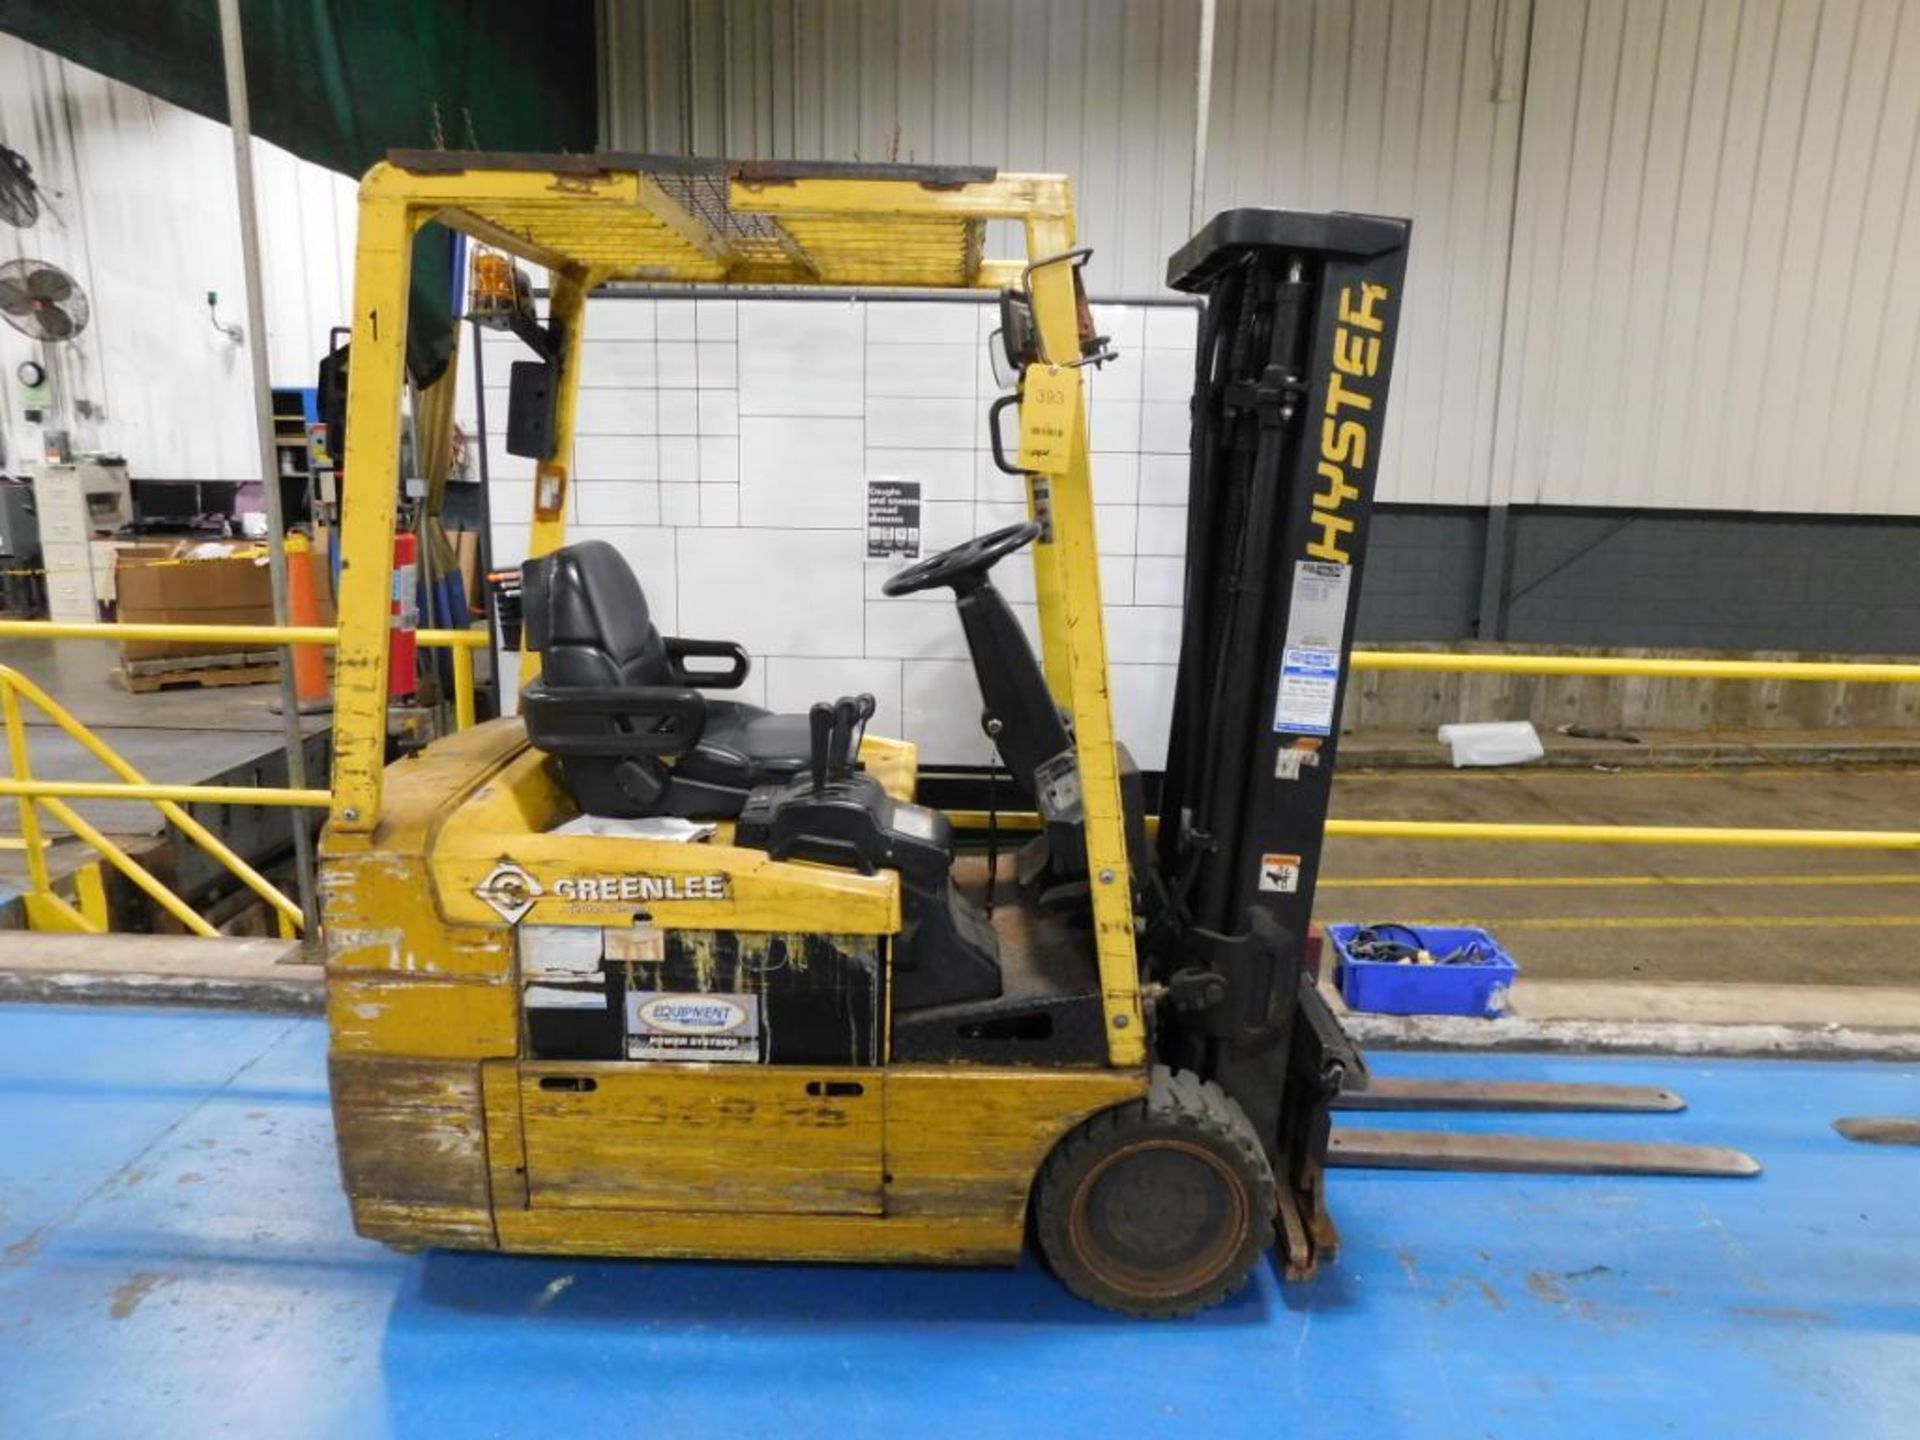 HYSTER 2400 LB. ELECTRIC FORKLIFT MODEL J35XMT2, S/N H160N0240BY, SOLID TIRES, OVERHEAD GUARD, 131